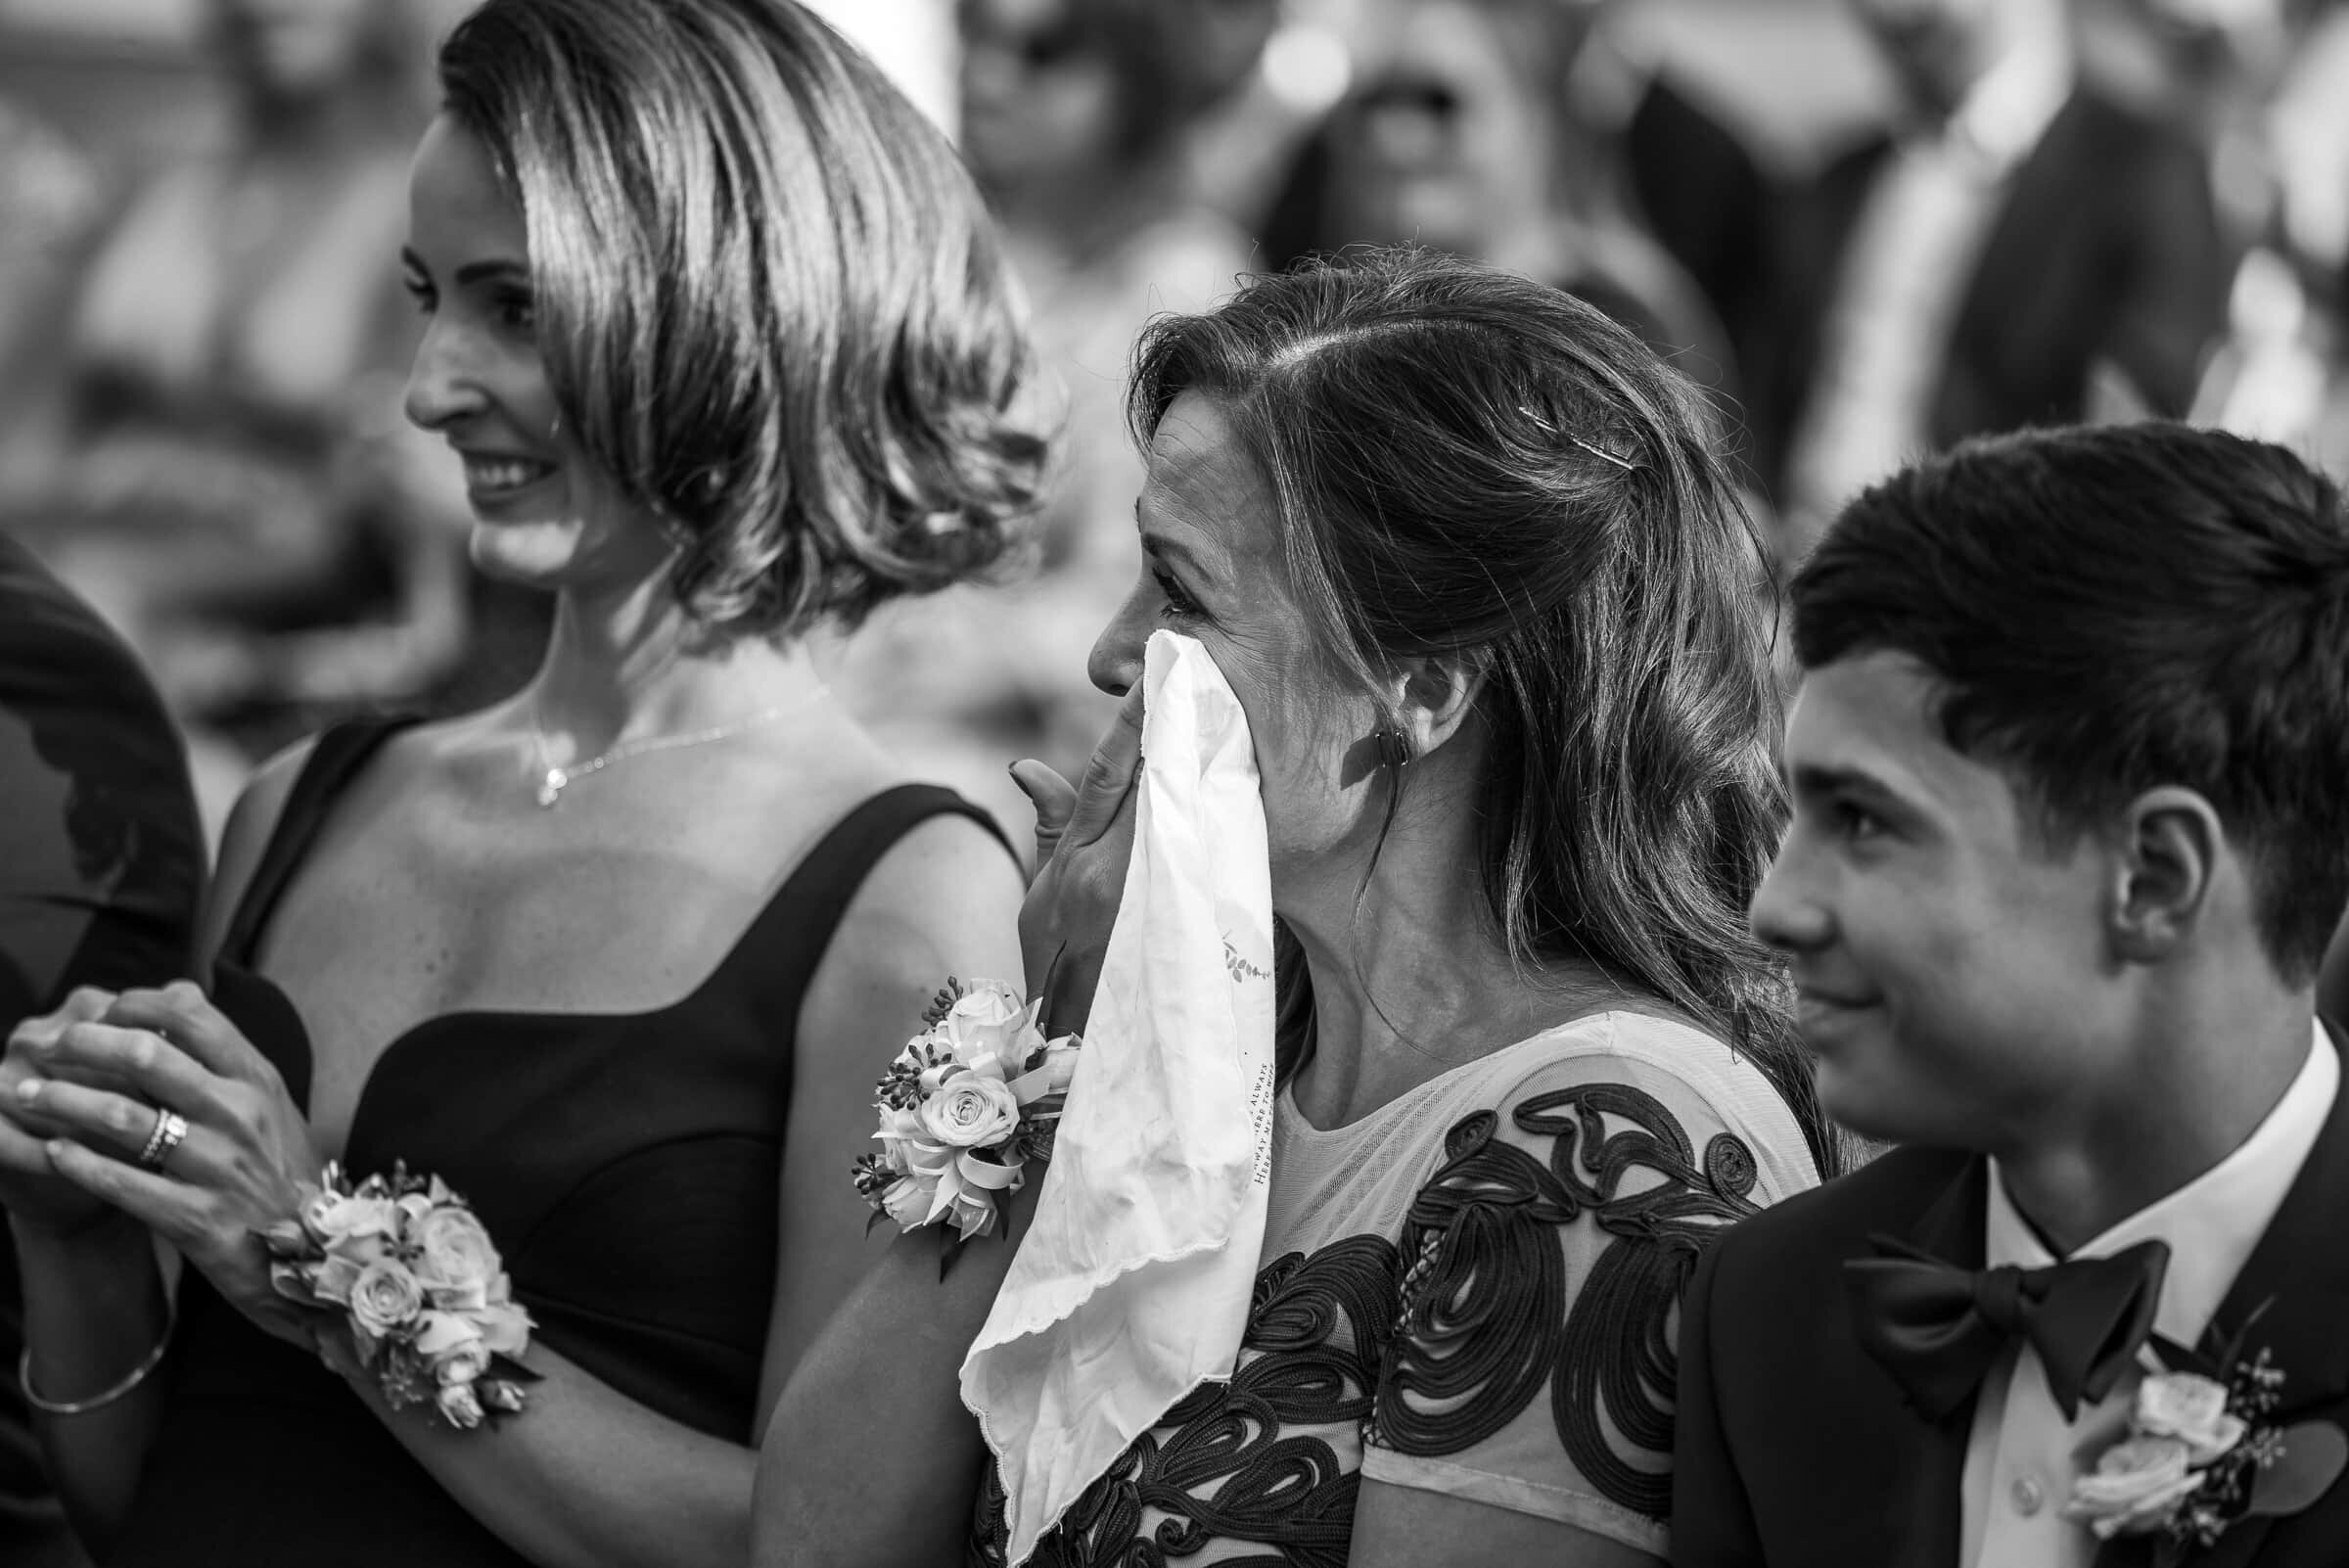 mother of the bride wiping tears while watching her daughter saying her wedding vows.